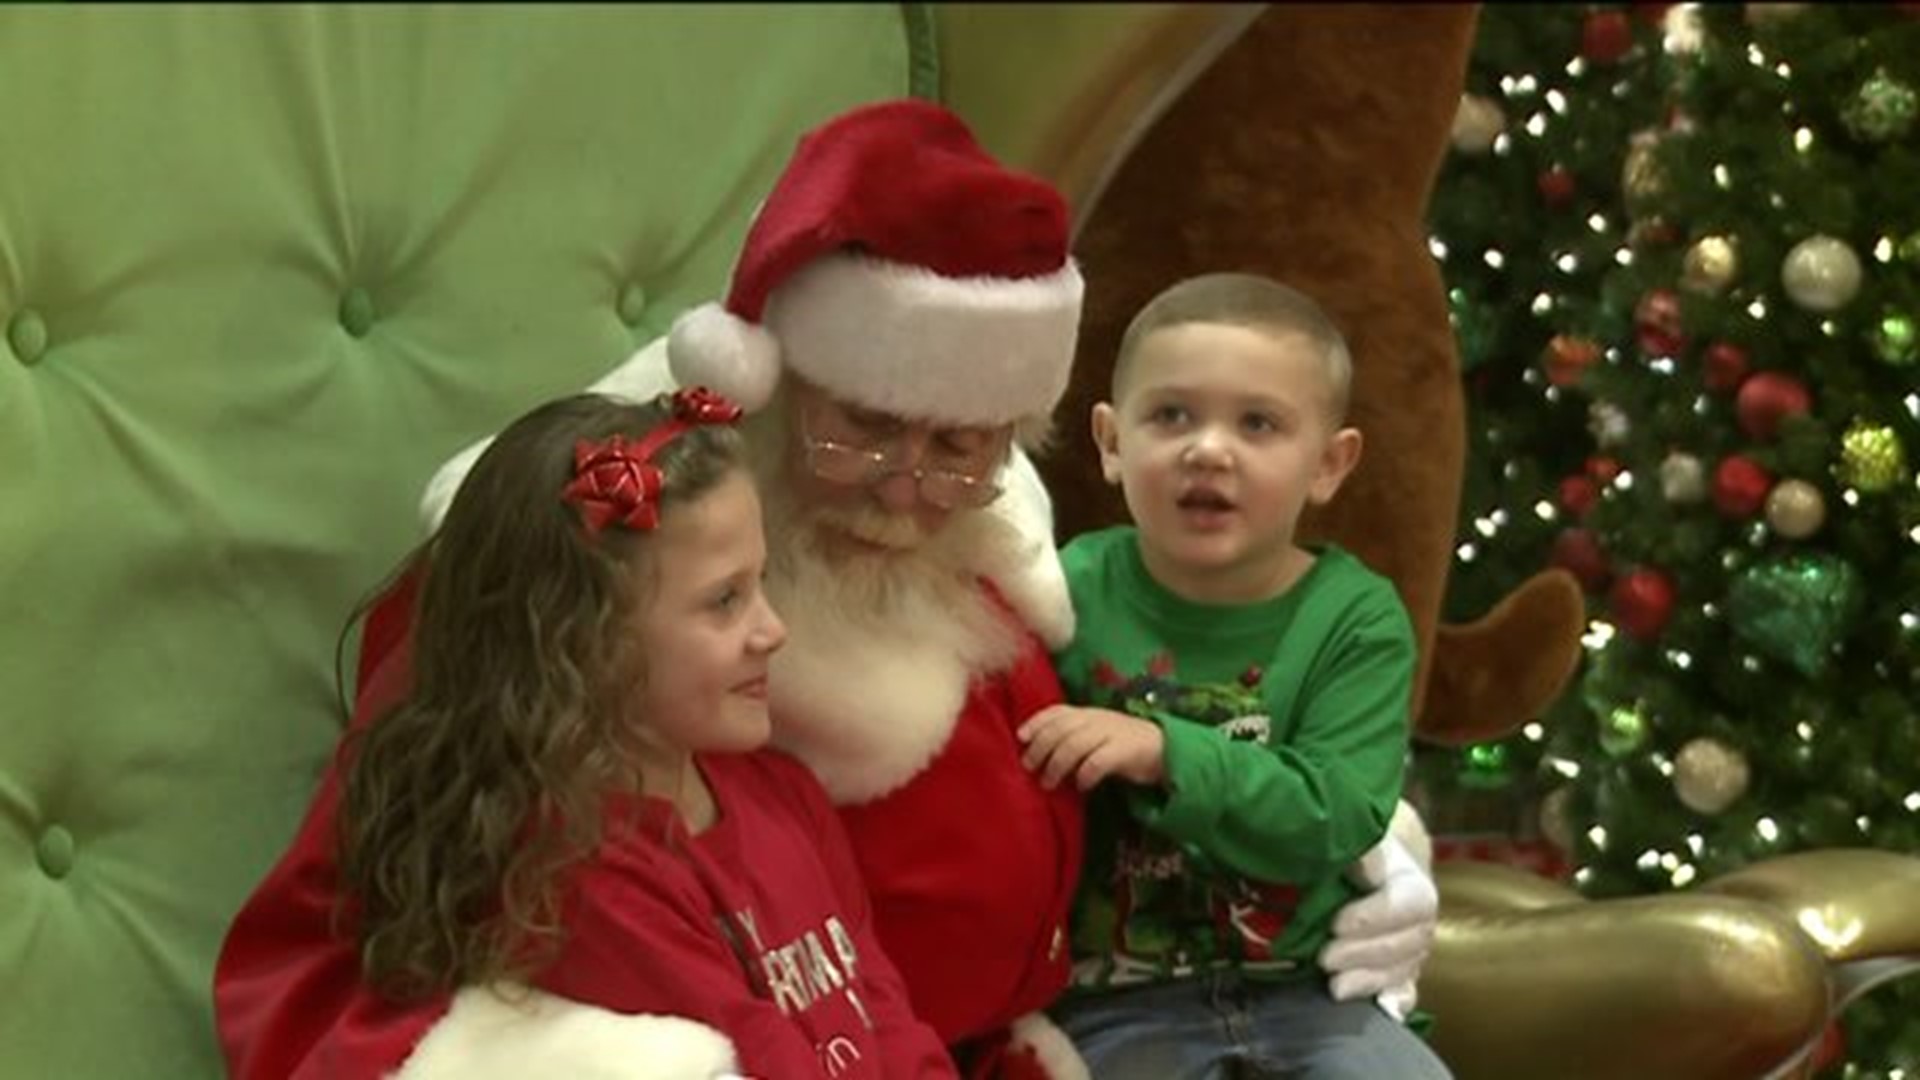 Kids Excited for Santafest at Wyoming Valley Mall